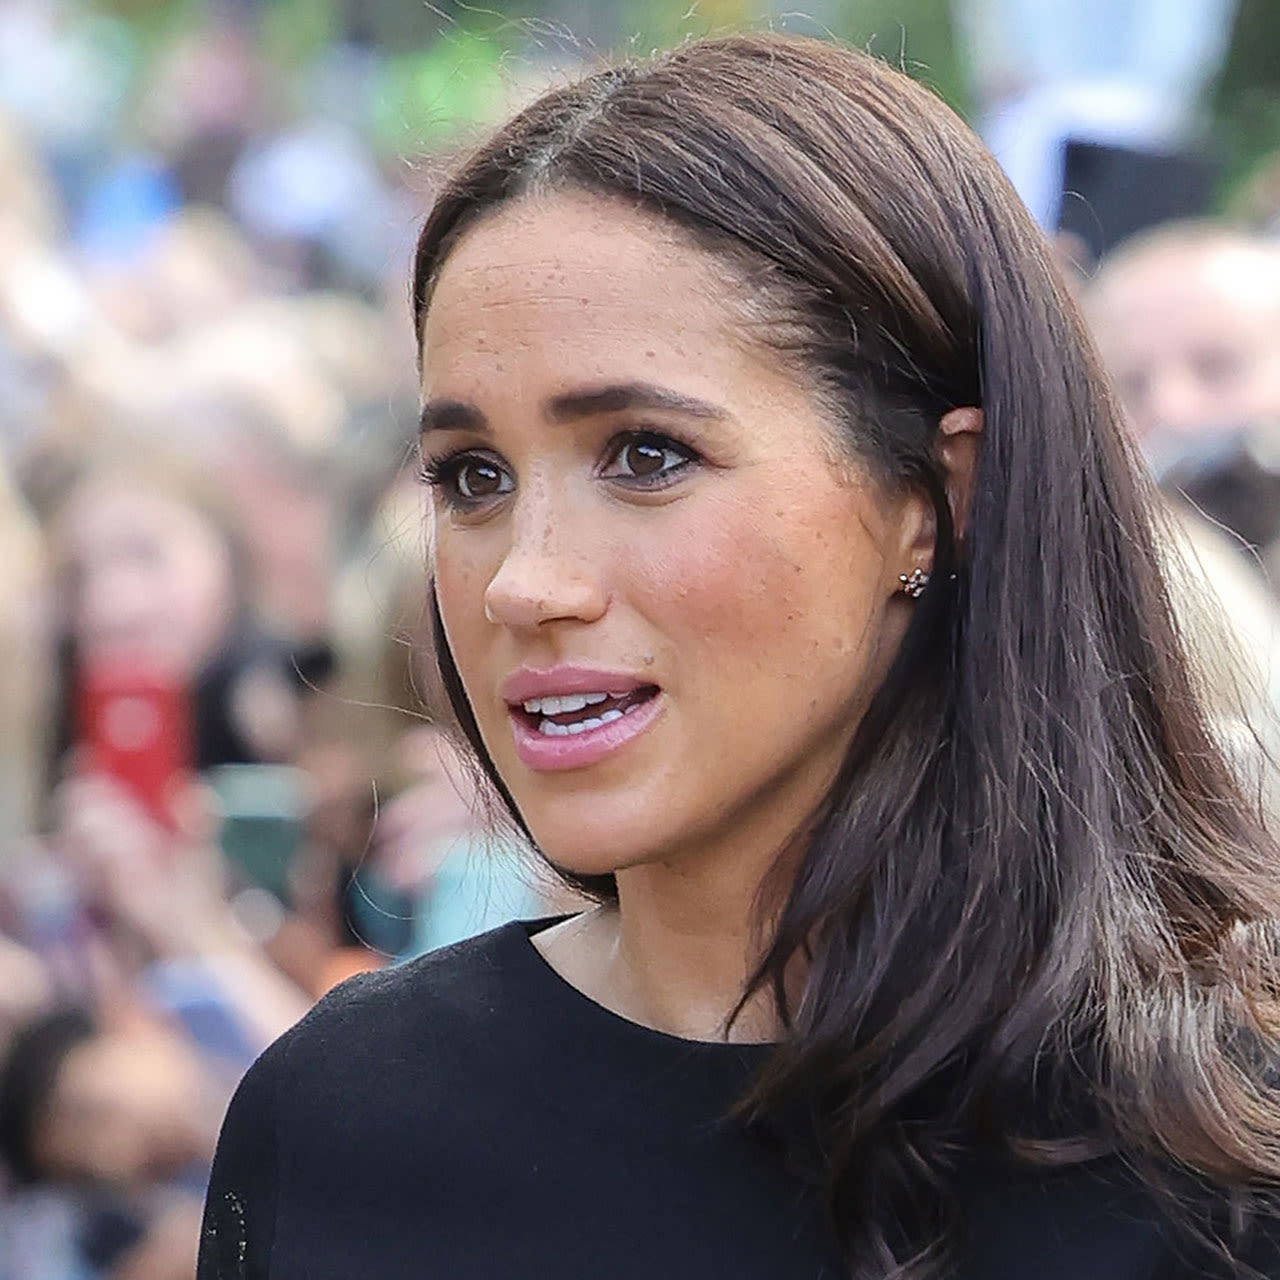 Meghan Markle Was Reportedly ‘In Tears’ When Her ‘Ridiculous’ Lifestyle Brand Was ‘Mocked’: ‘She Feels People Are...